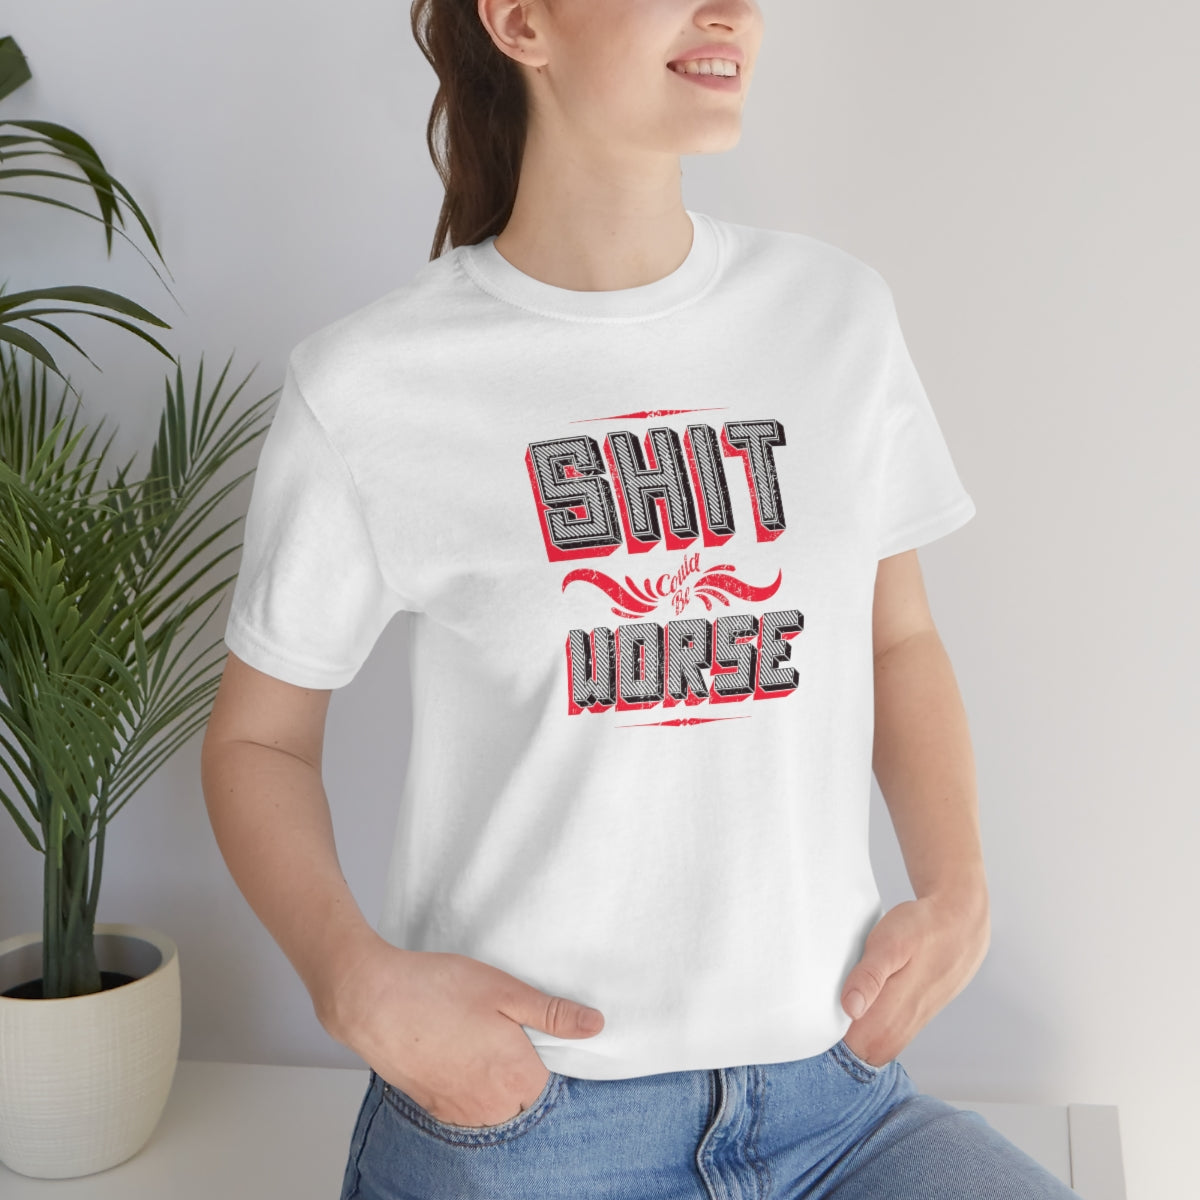 Shit Could Be Worse Tee